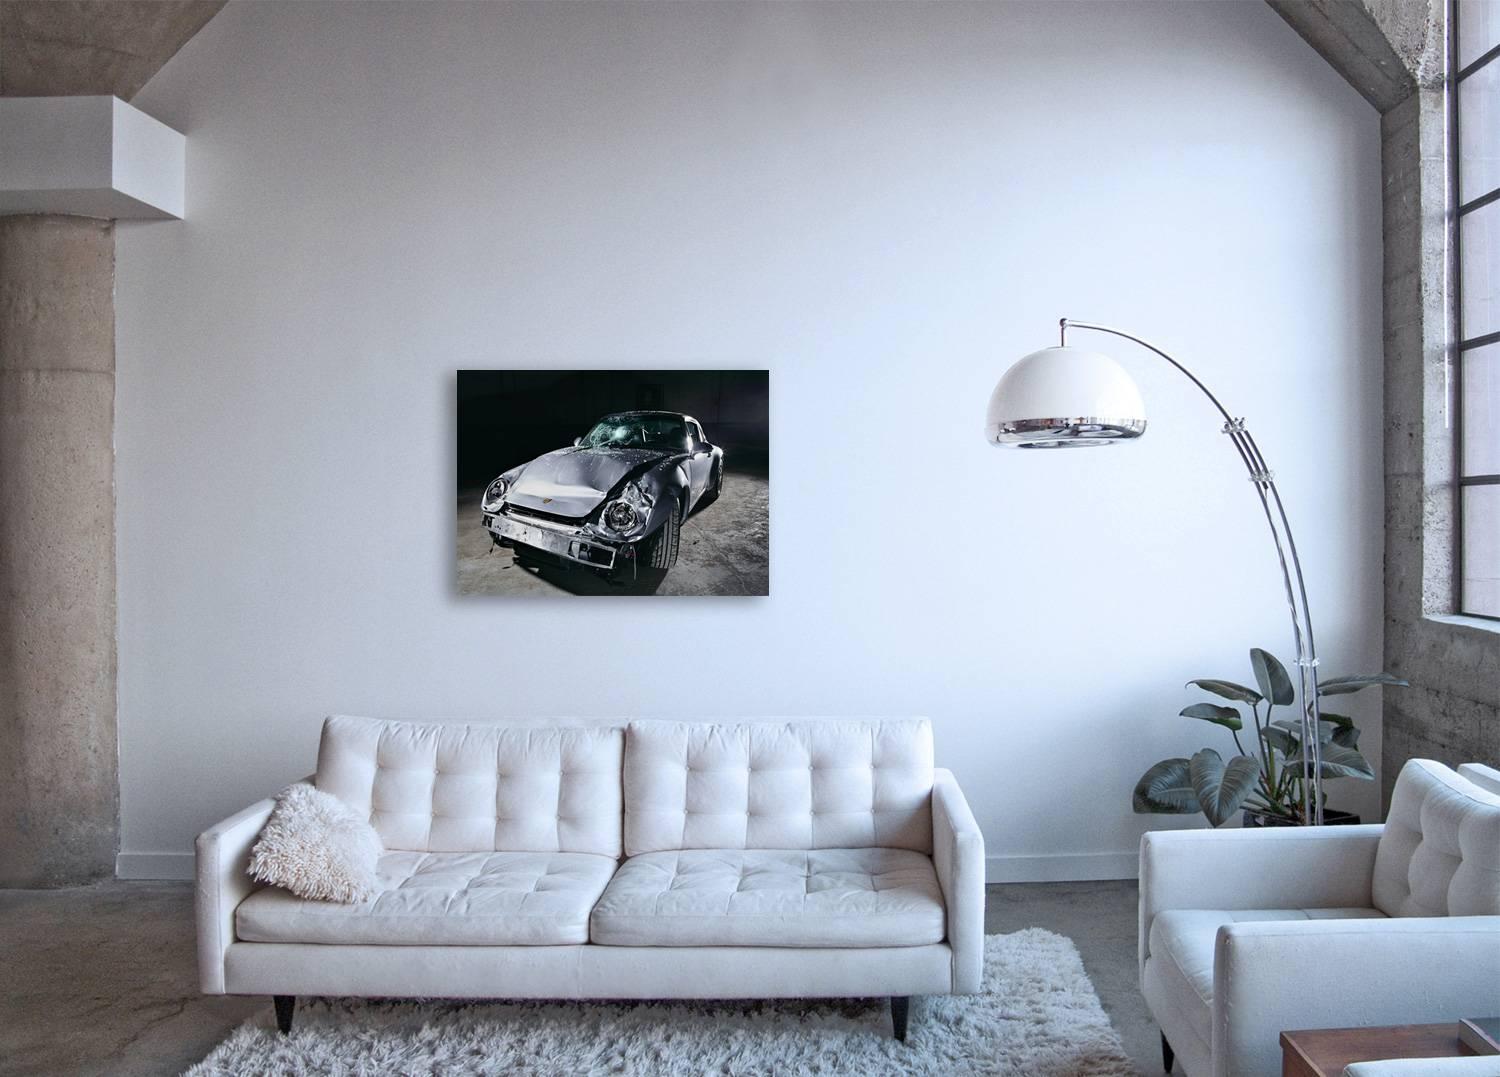 Nine-One-One (Porsche 911) - still life photograph of iconic crashed automobile - Photograph by Frank Schott